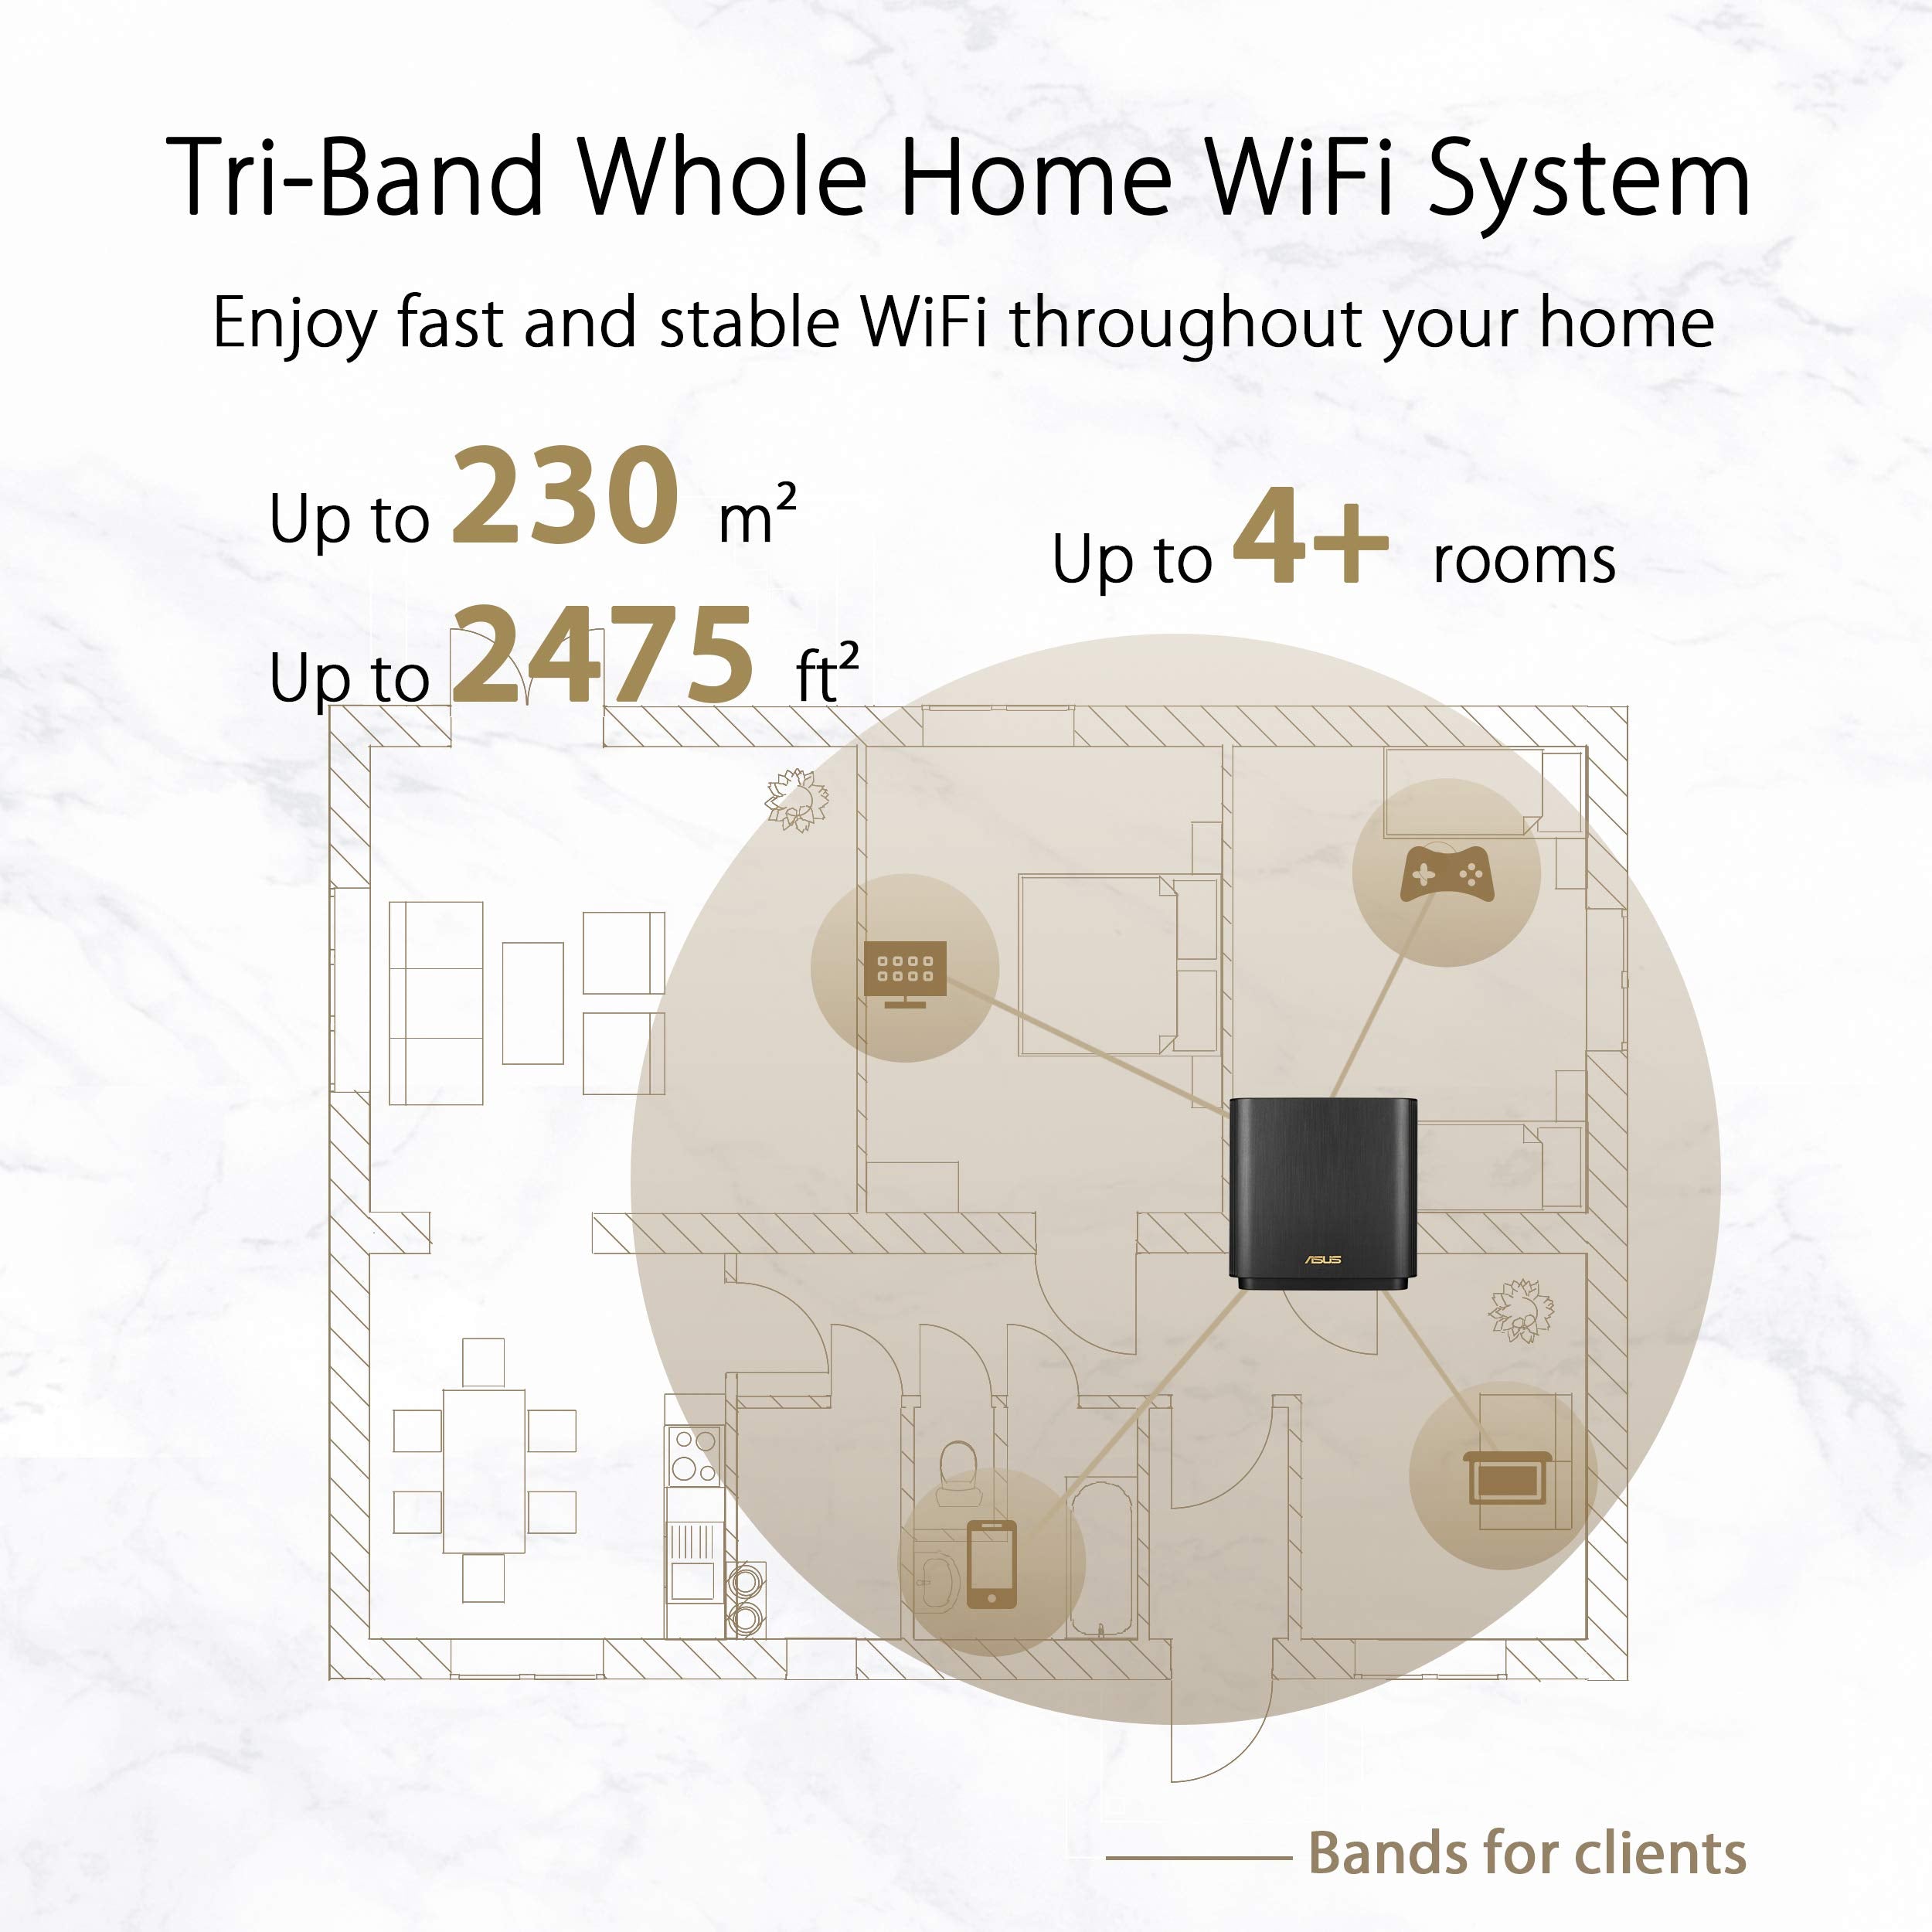 ASUS ZenWiFi AX Whole-Home Tri-Band Mesh WiFi 6 System(XT8), Coverage Up to 230 sq m or 2475 sq ft or 4+ Rooms, 6.6 Gbps WiFi, 3 SSIDs, Life-Time Free Network Security and Parental Controls, 2.5G Port